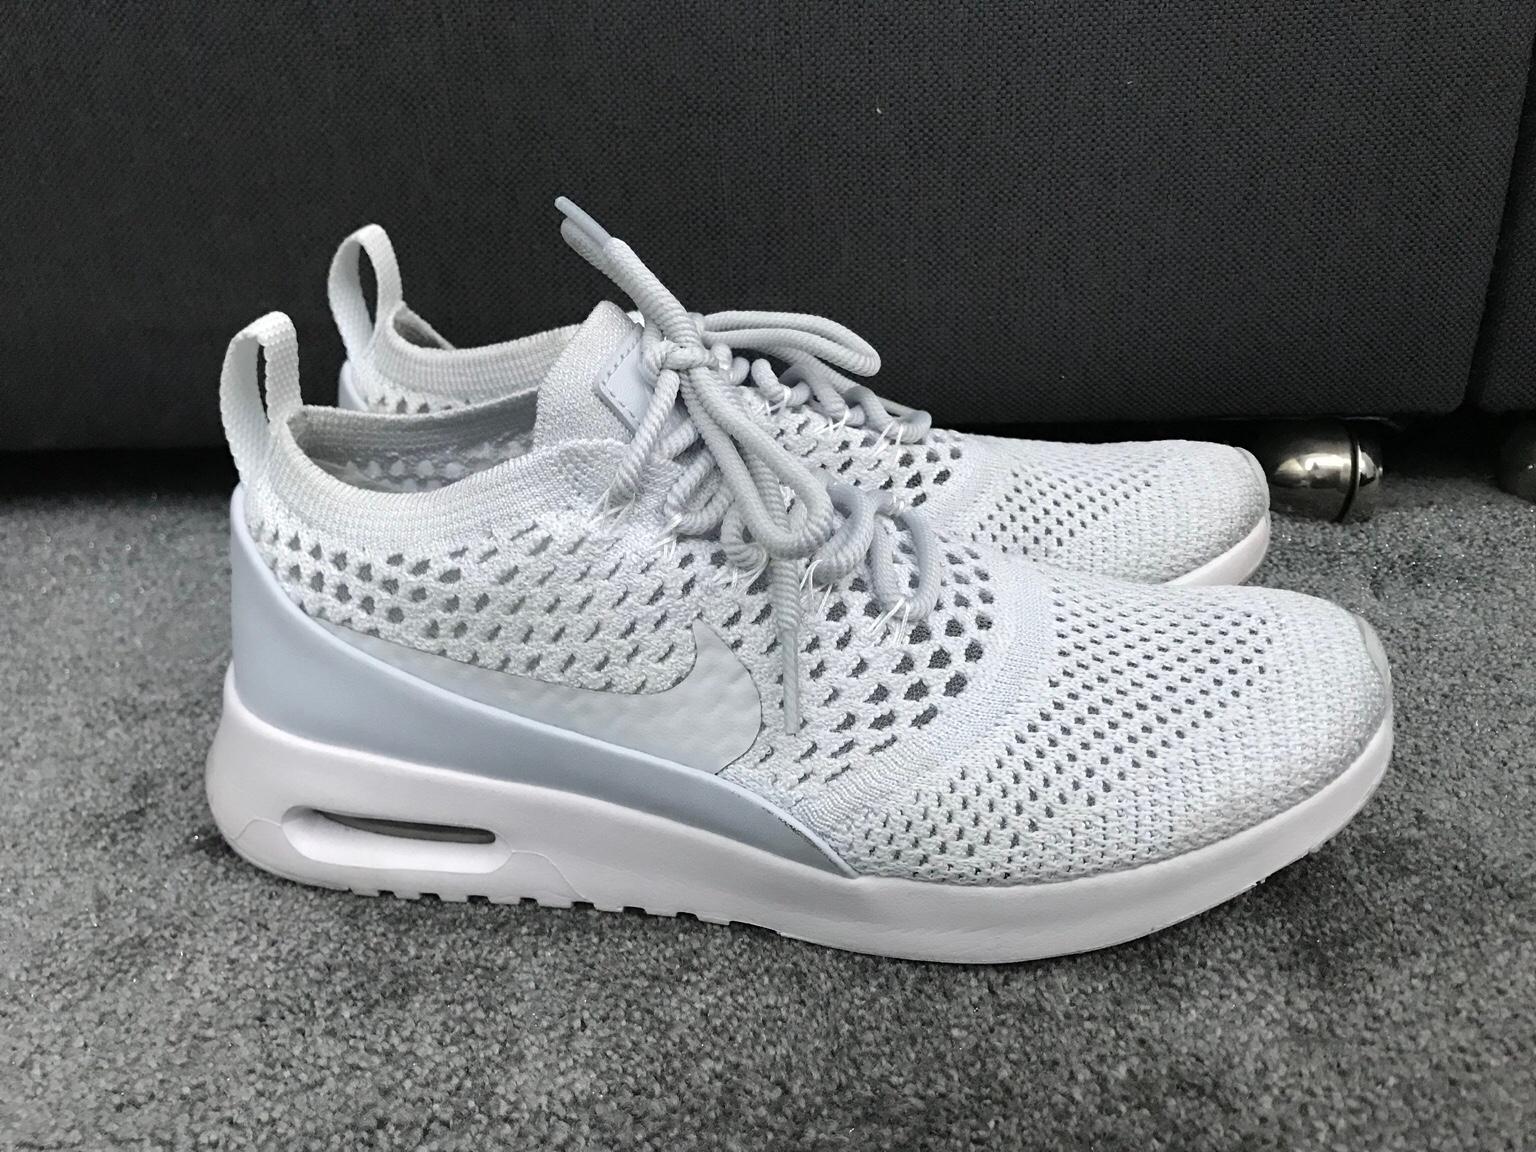 Požuri Zabava Perpetual  Nike Air Max Thea Ultra Flyknit in KT14 Woking for £25.00 for sale | Shpock